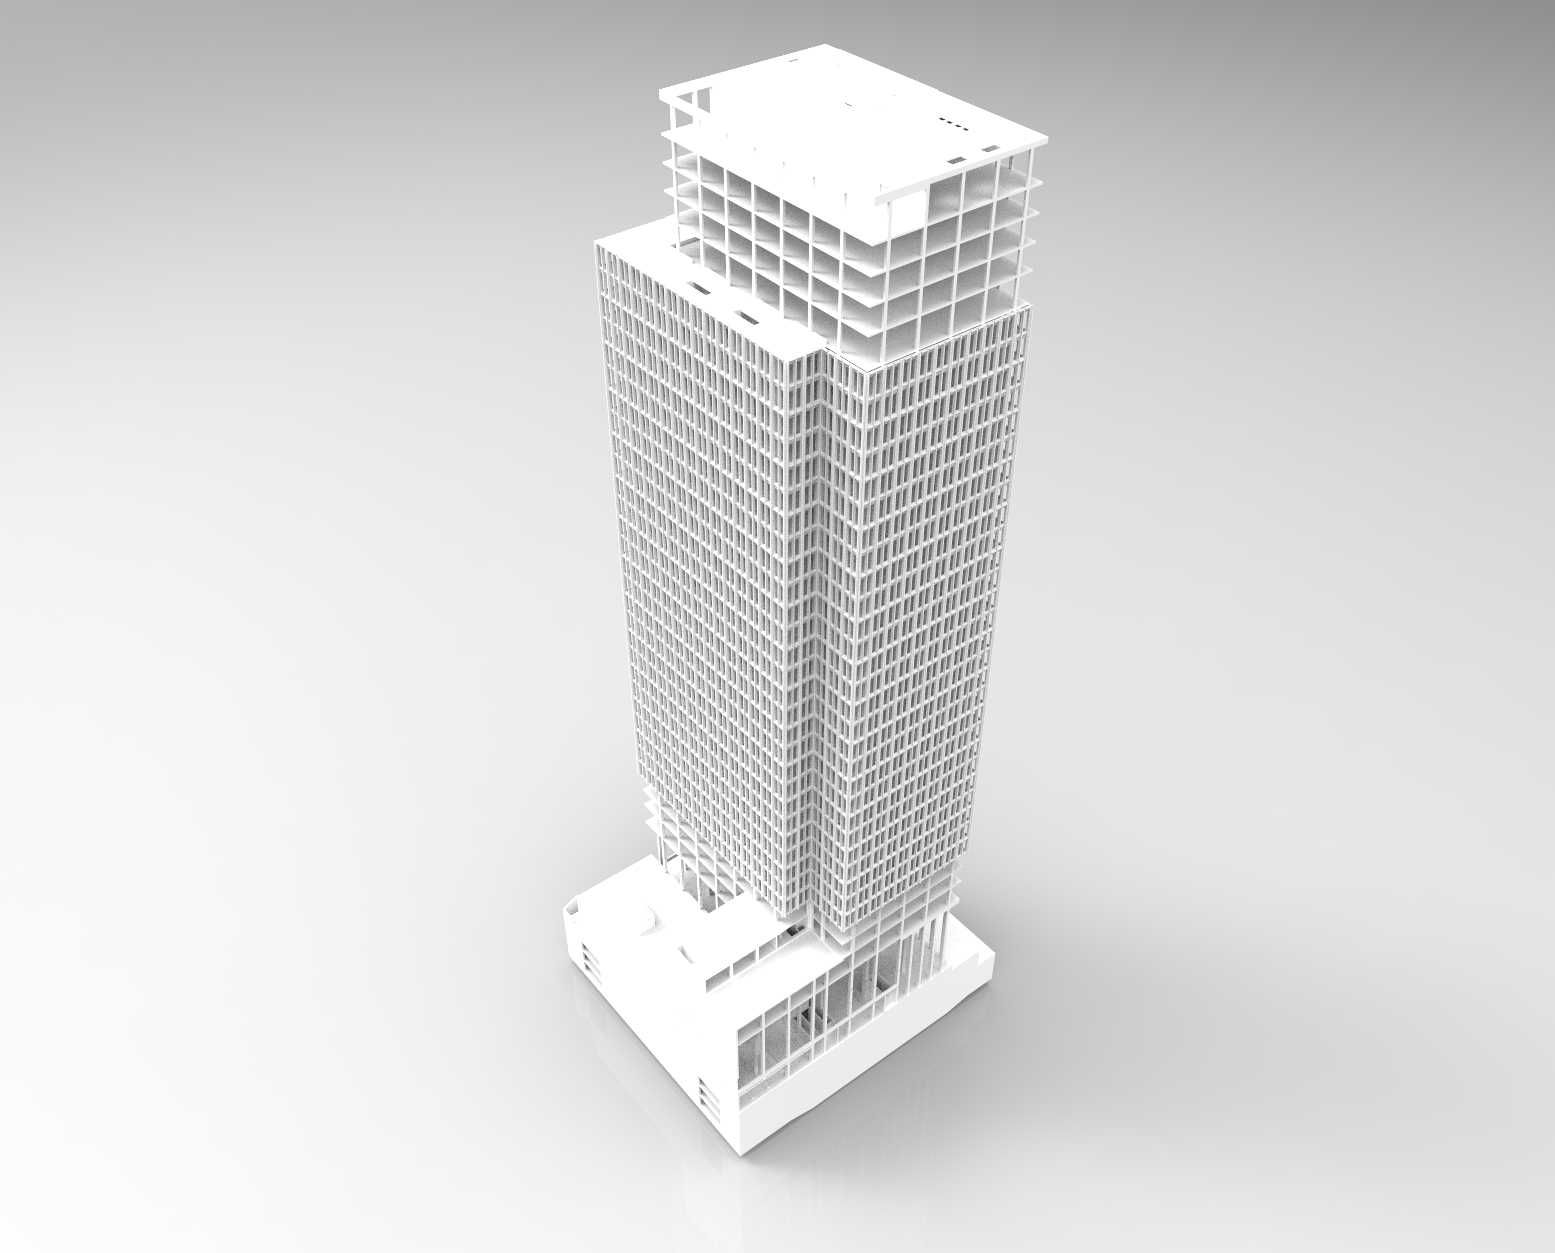 Greyscale structural model of a highrise building